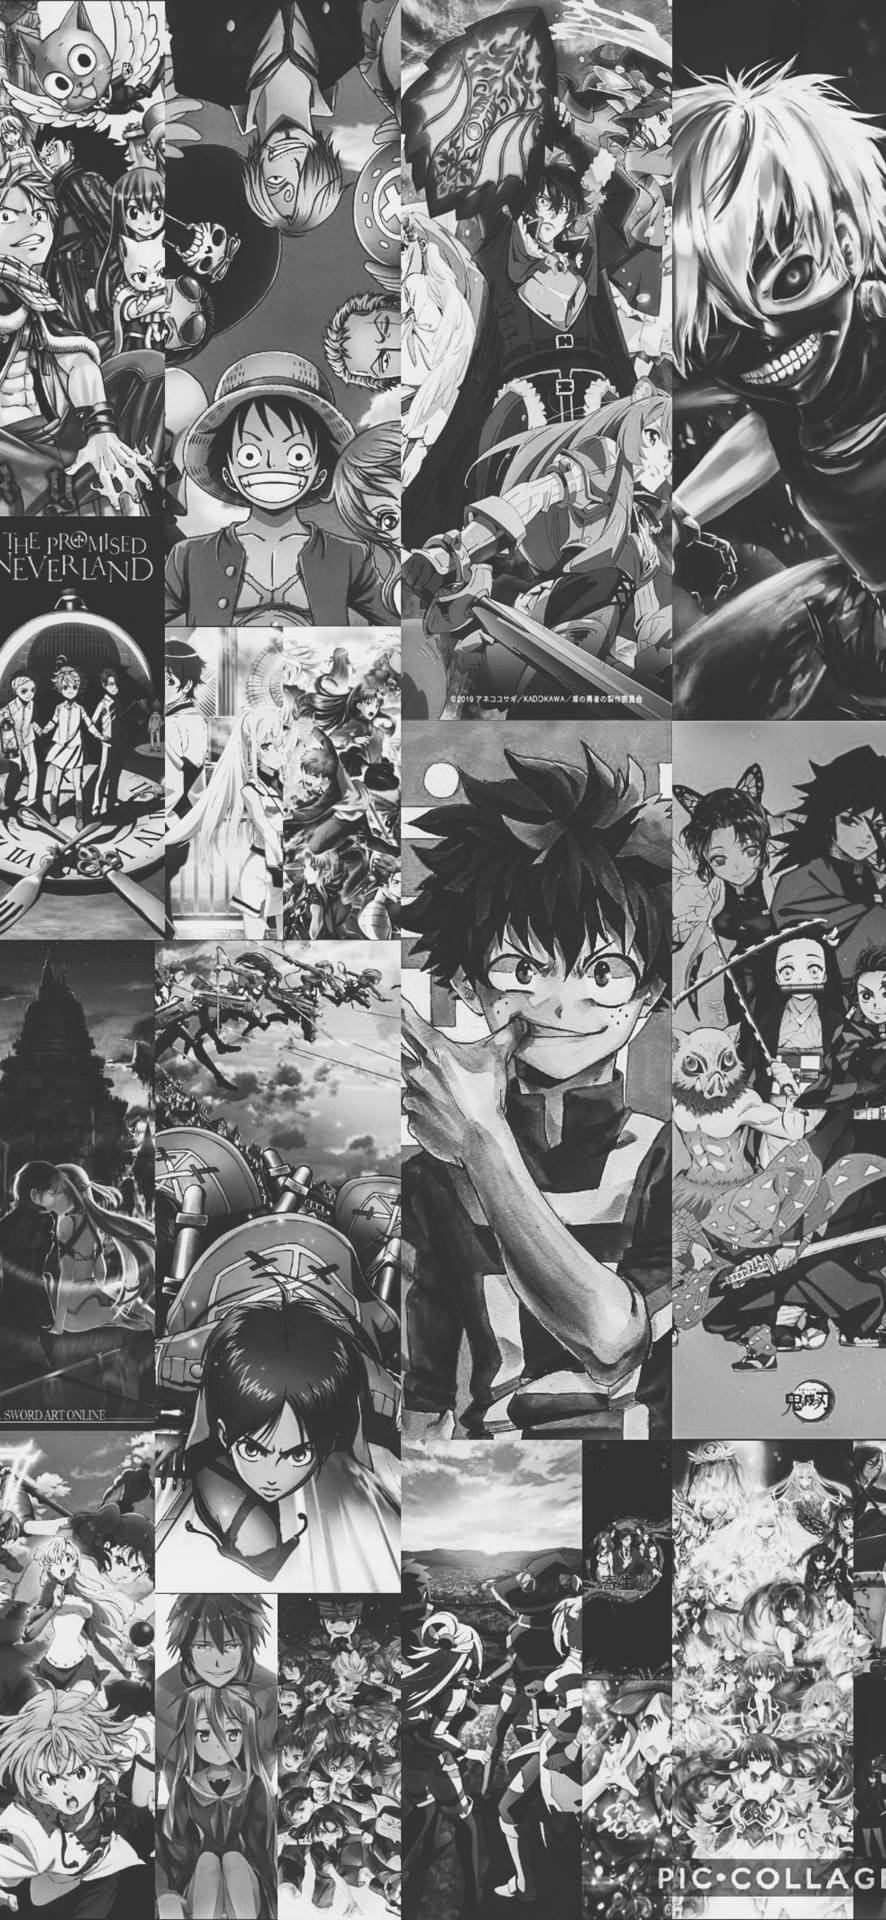 Collage Aesthetic Anime Iphone Wallpaper